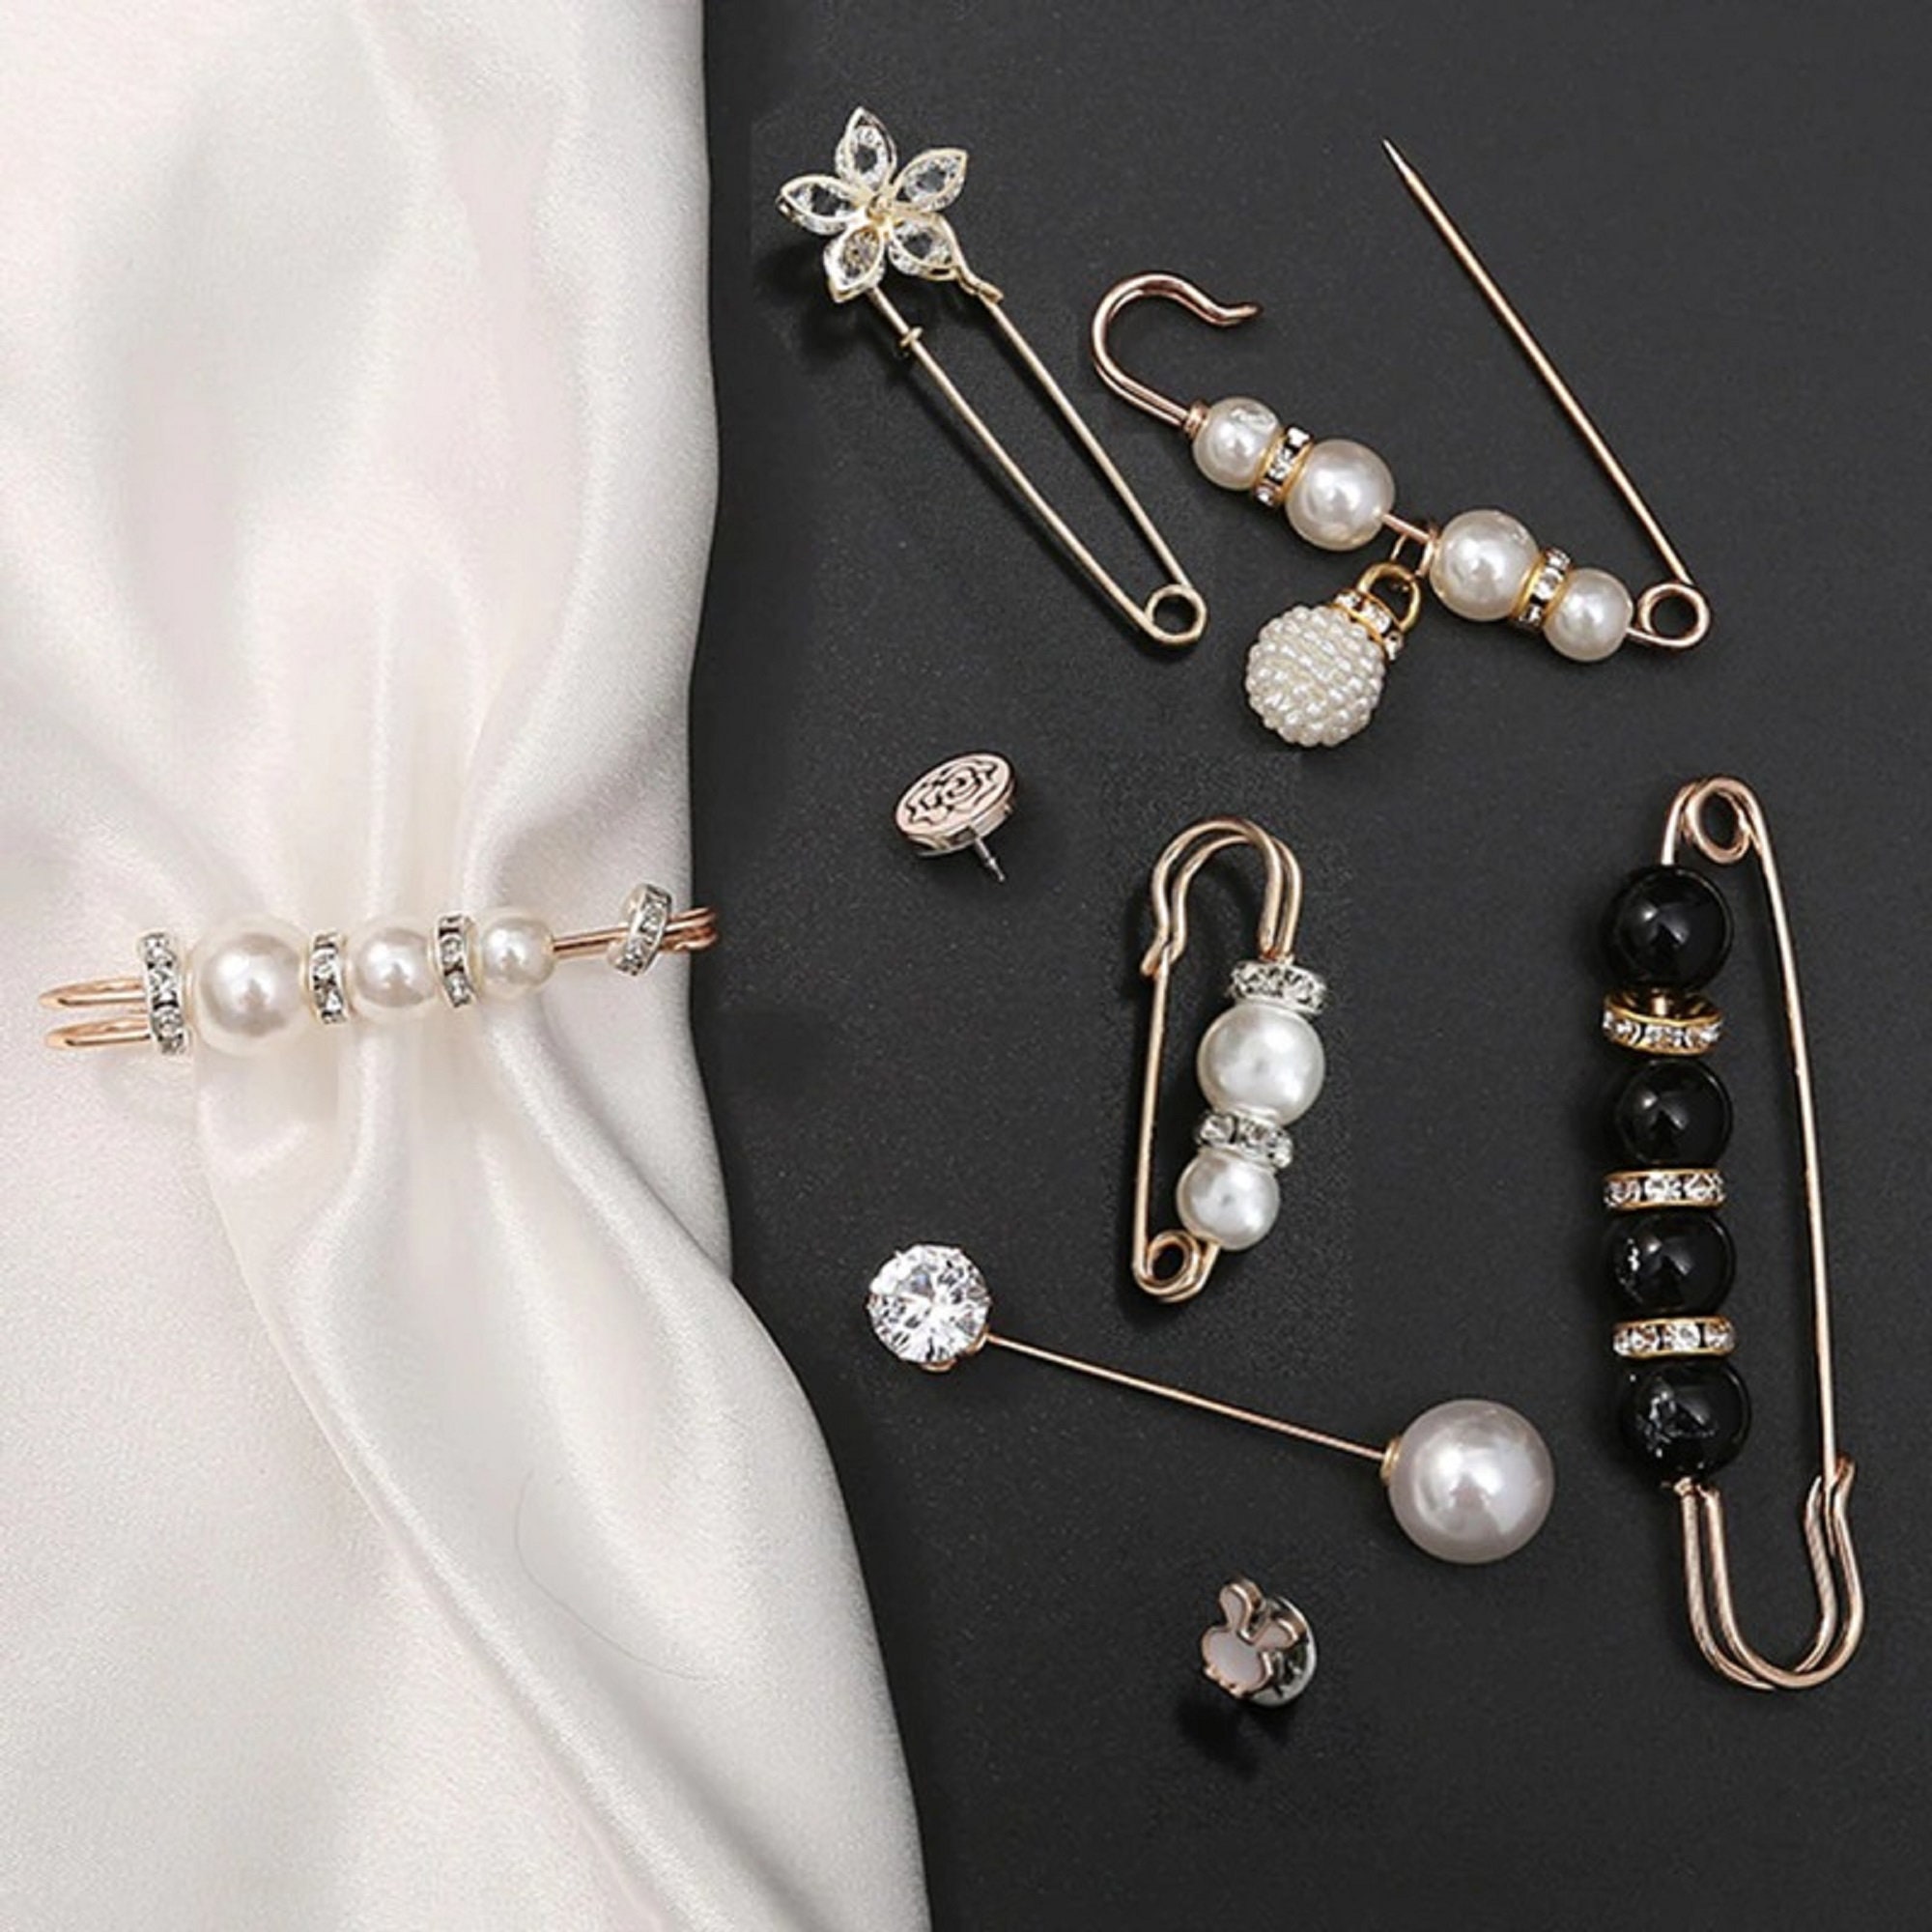 12 Pcs Pearl Brooch Pins Set Sweater Shawl Pins Faux Pearl Safety Pins for Women Girls Clothing Dresses Decoration Accessories,12 Styles 